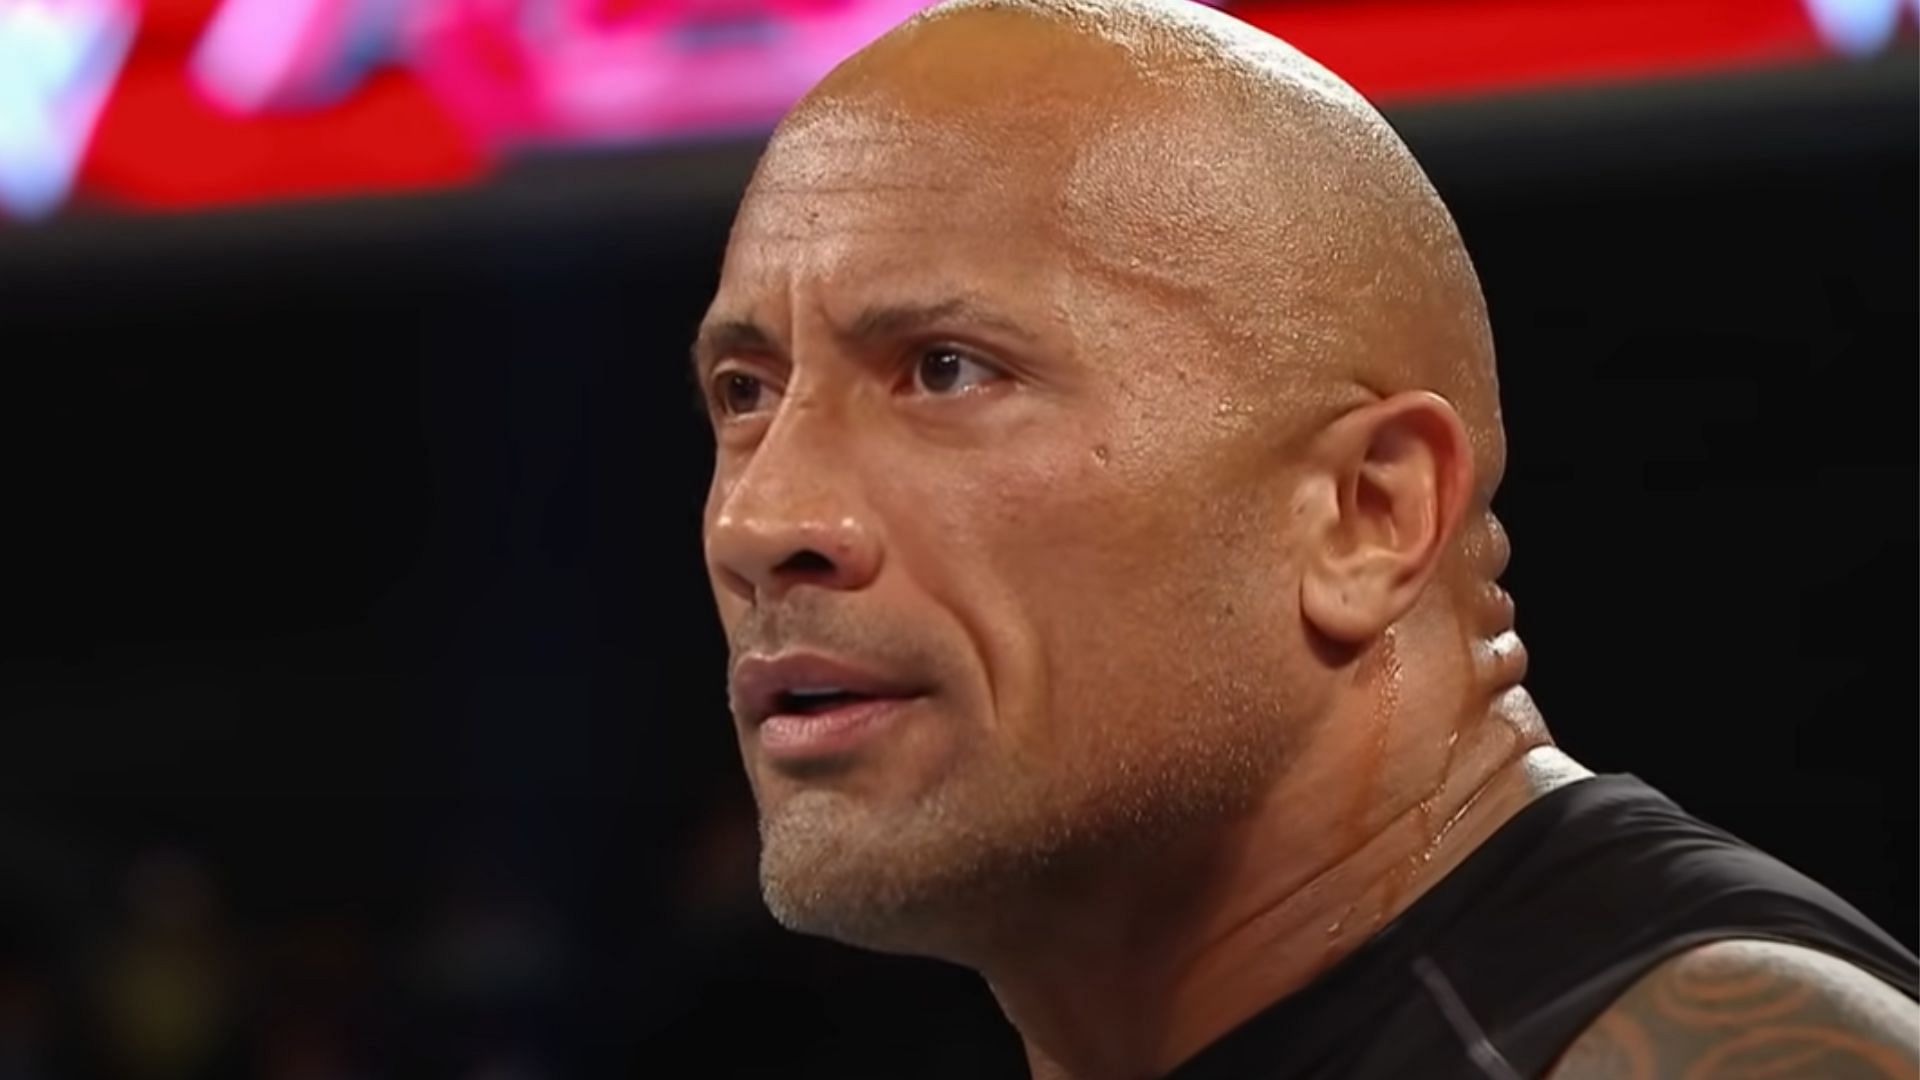 The Rock, real name Dwayne Johnson, is an eight-time WWE Champion